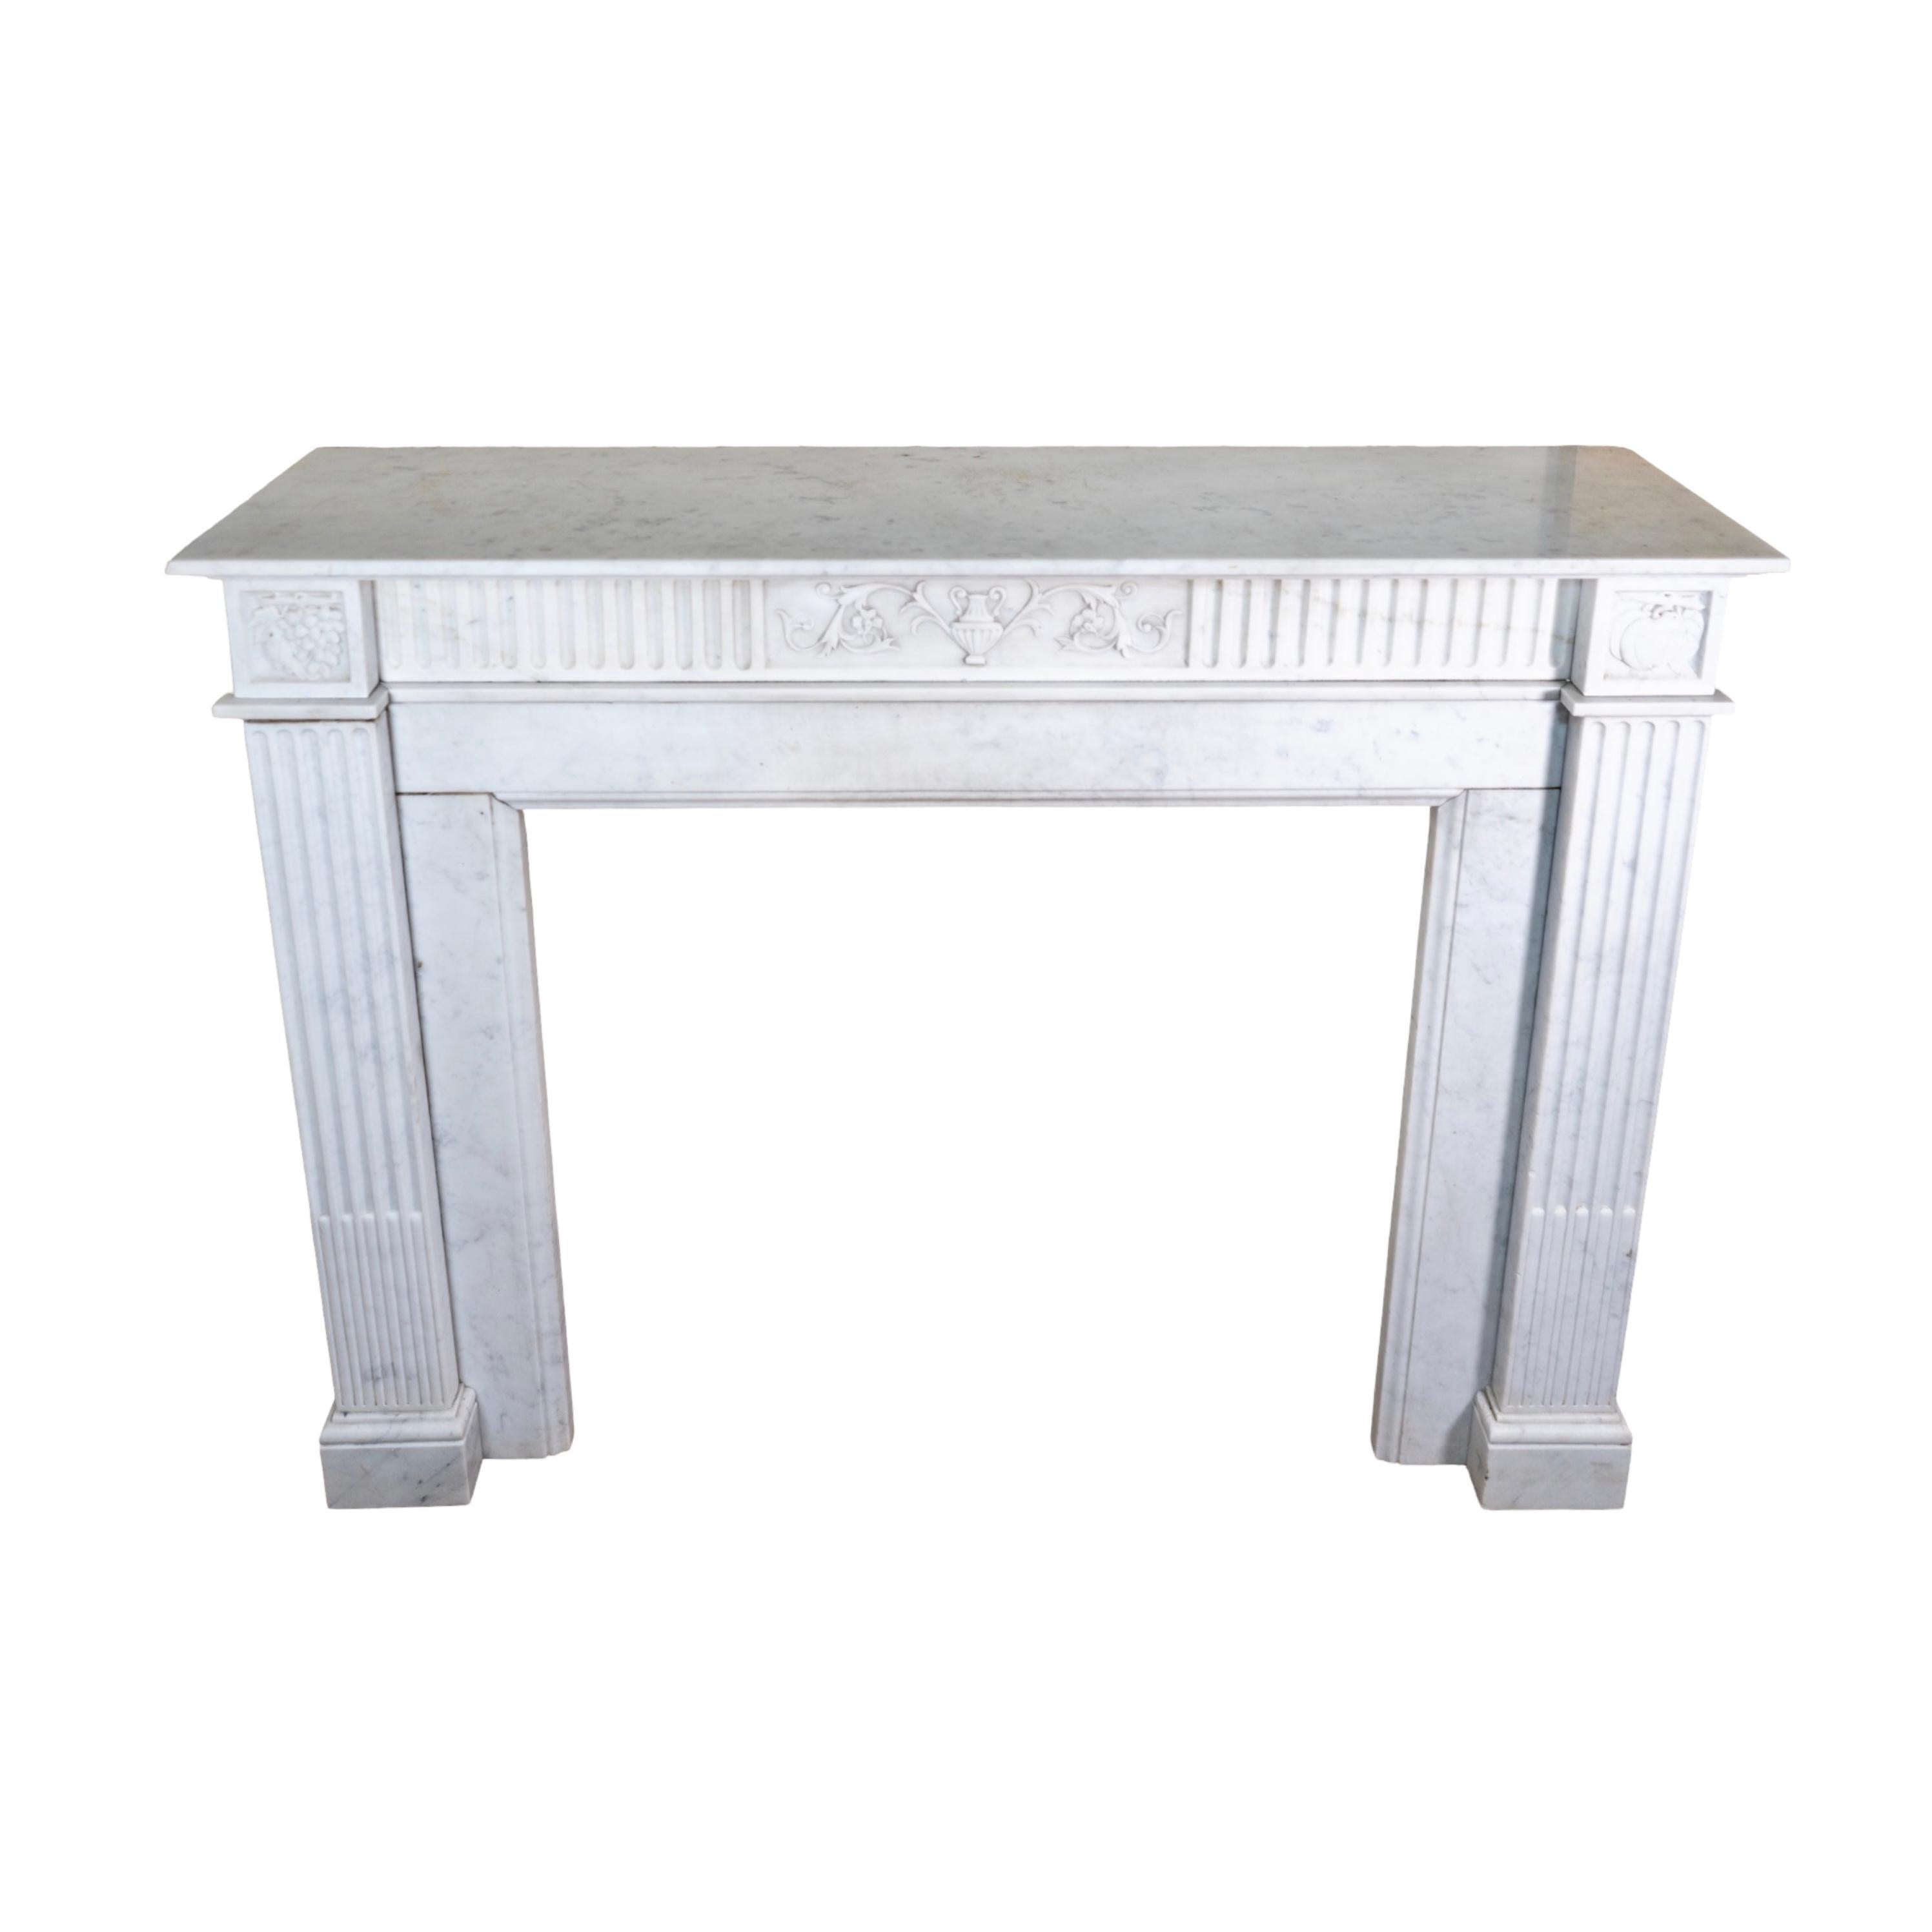 This elegant French Marble Mantel is a stunning antique, originating from France circa 1880. Its timeless beauty is crafted with premium white veined Carrara marble, perfect for adding a touch of sophistication to any room. 